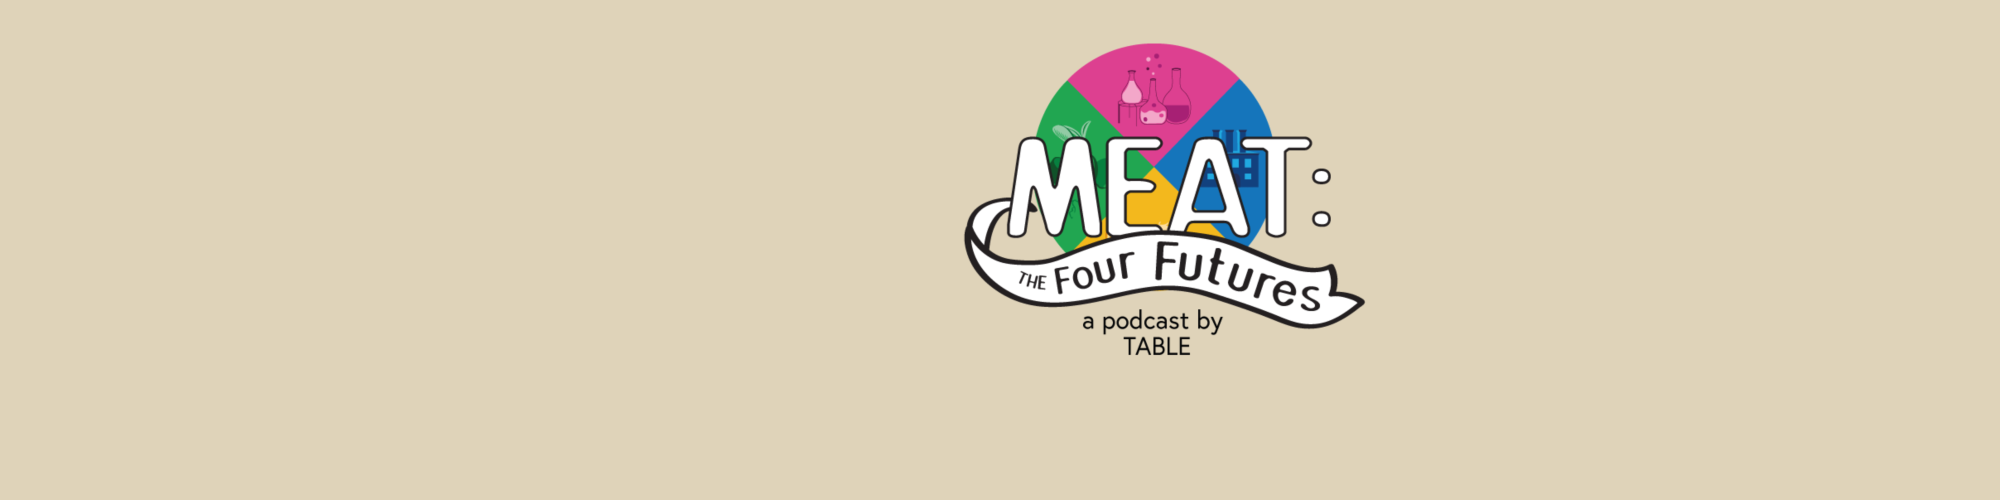 A beige background with the Meat: The Four Futures logo